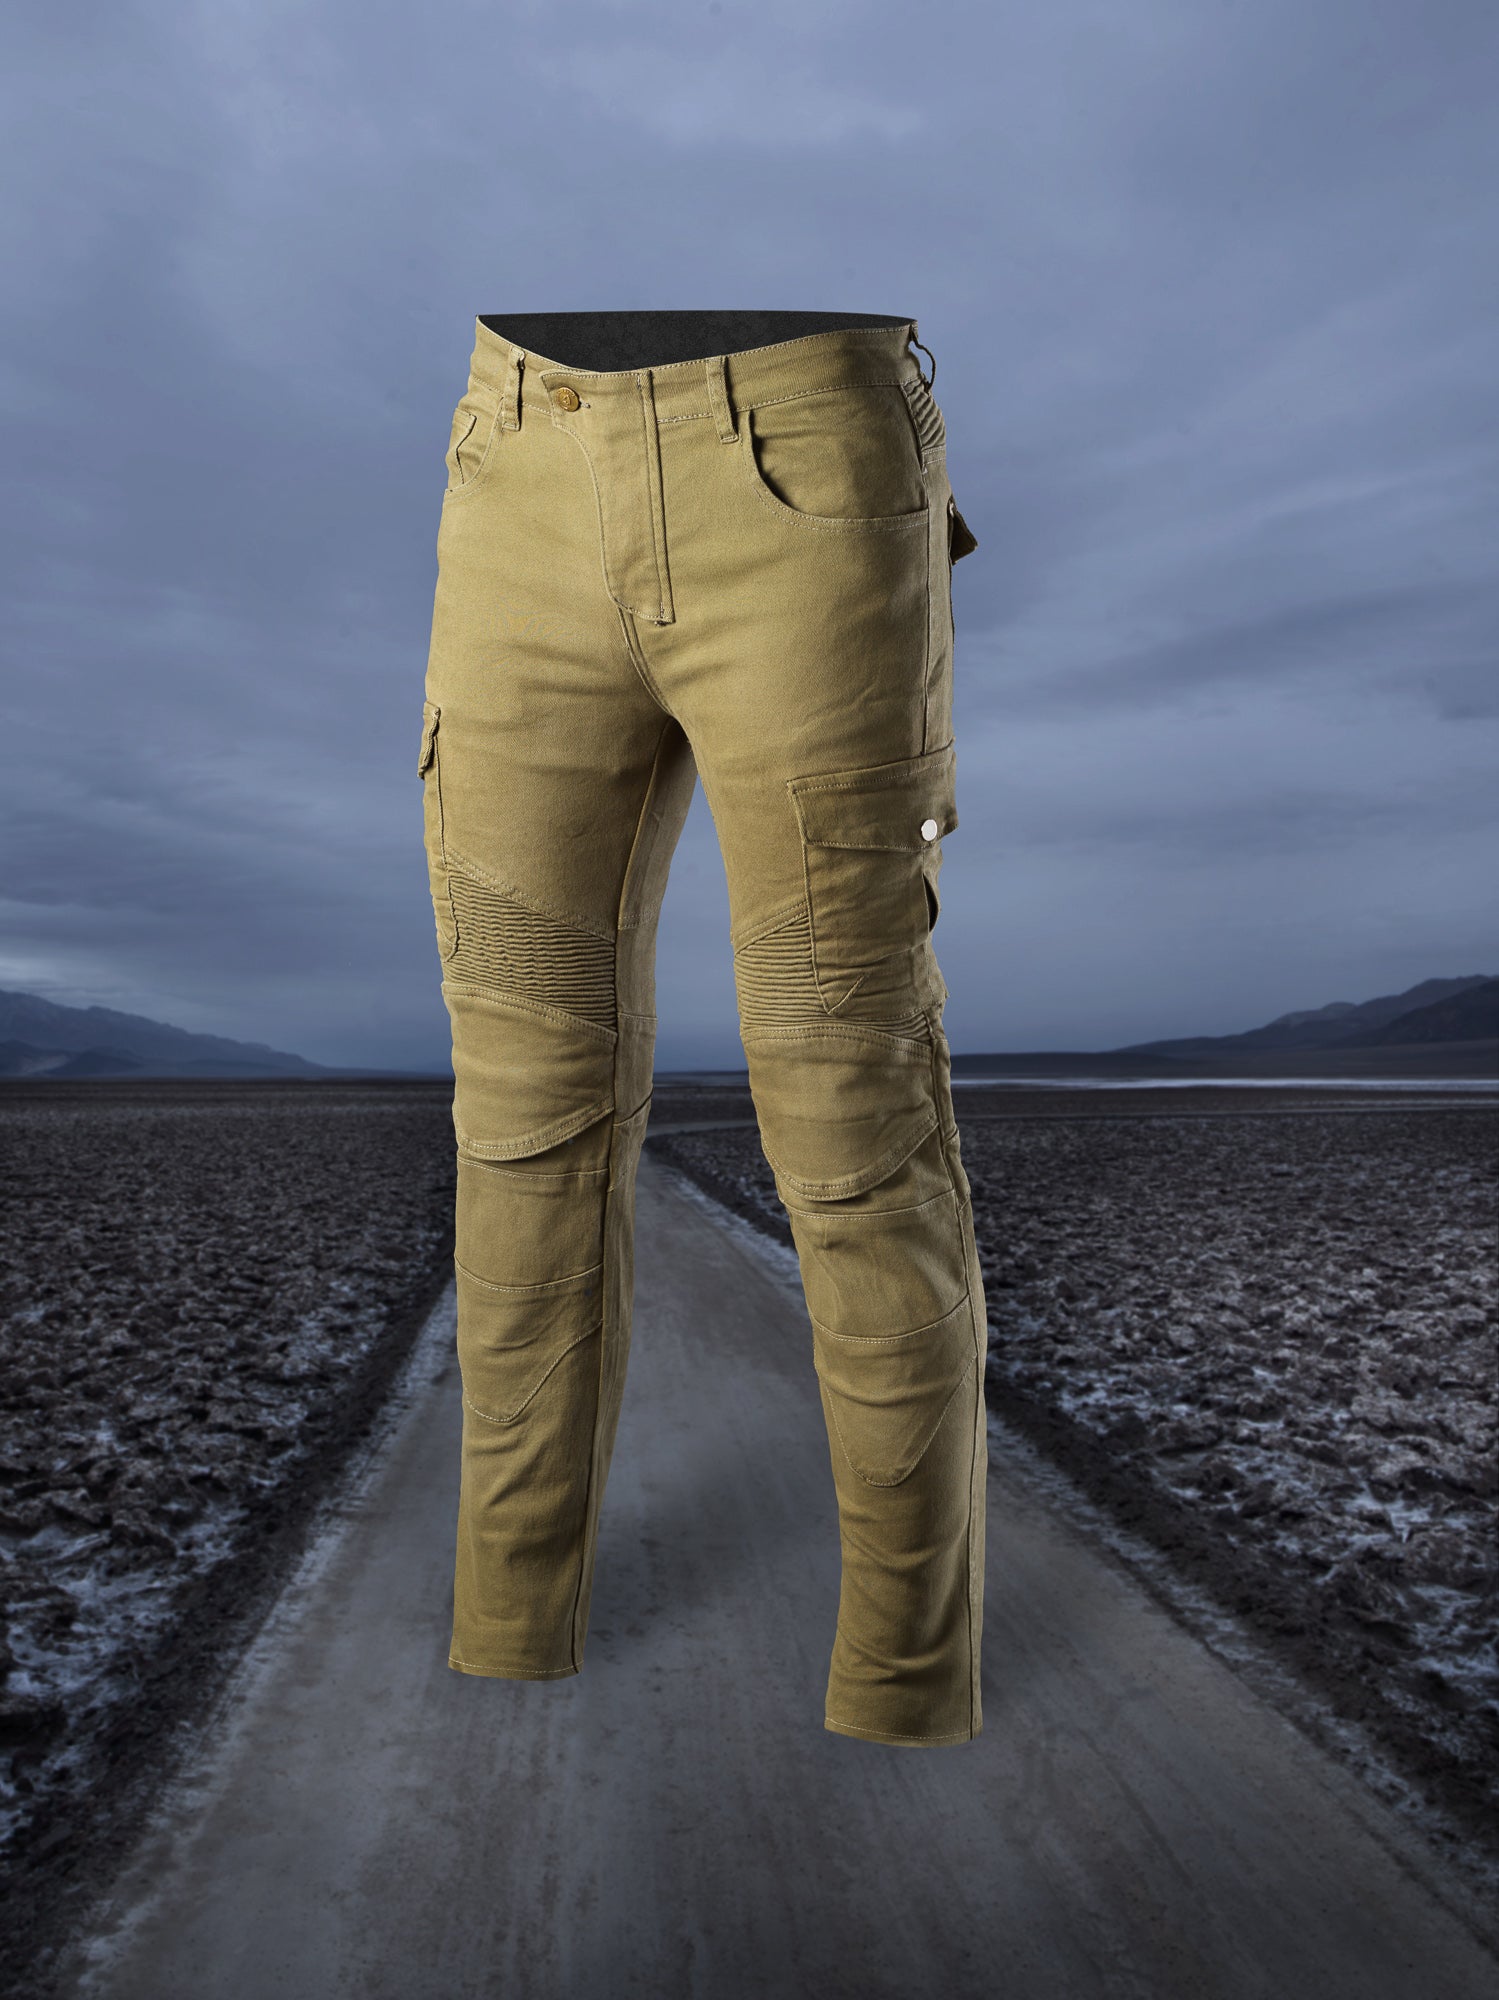 Olive Coyote Armored Motorcycle Pants